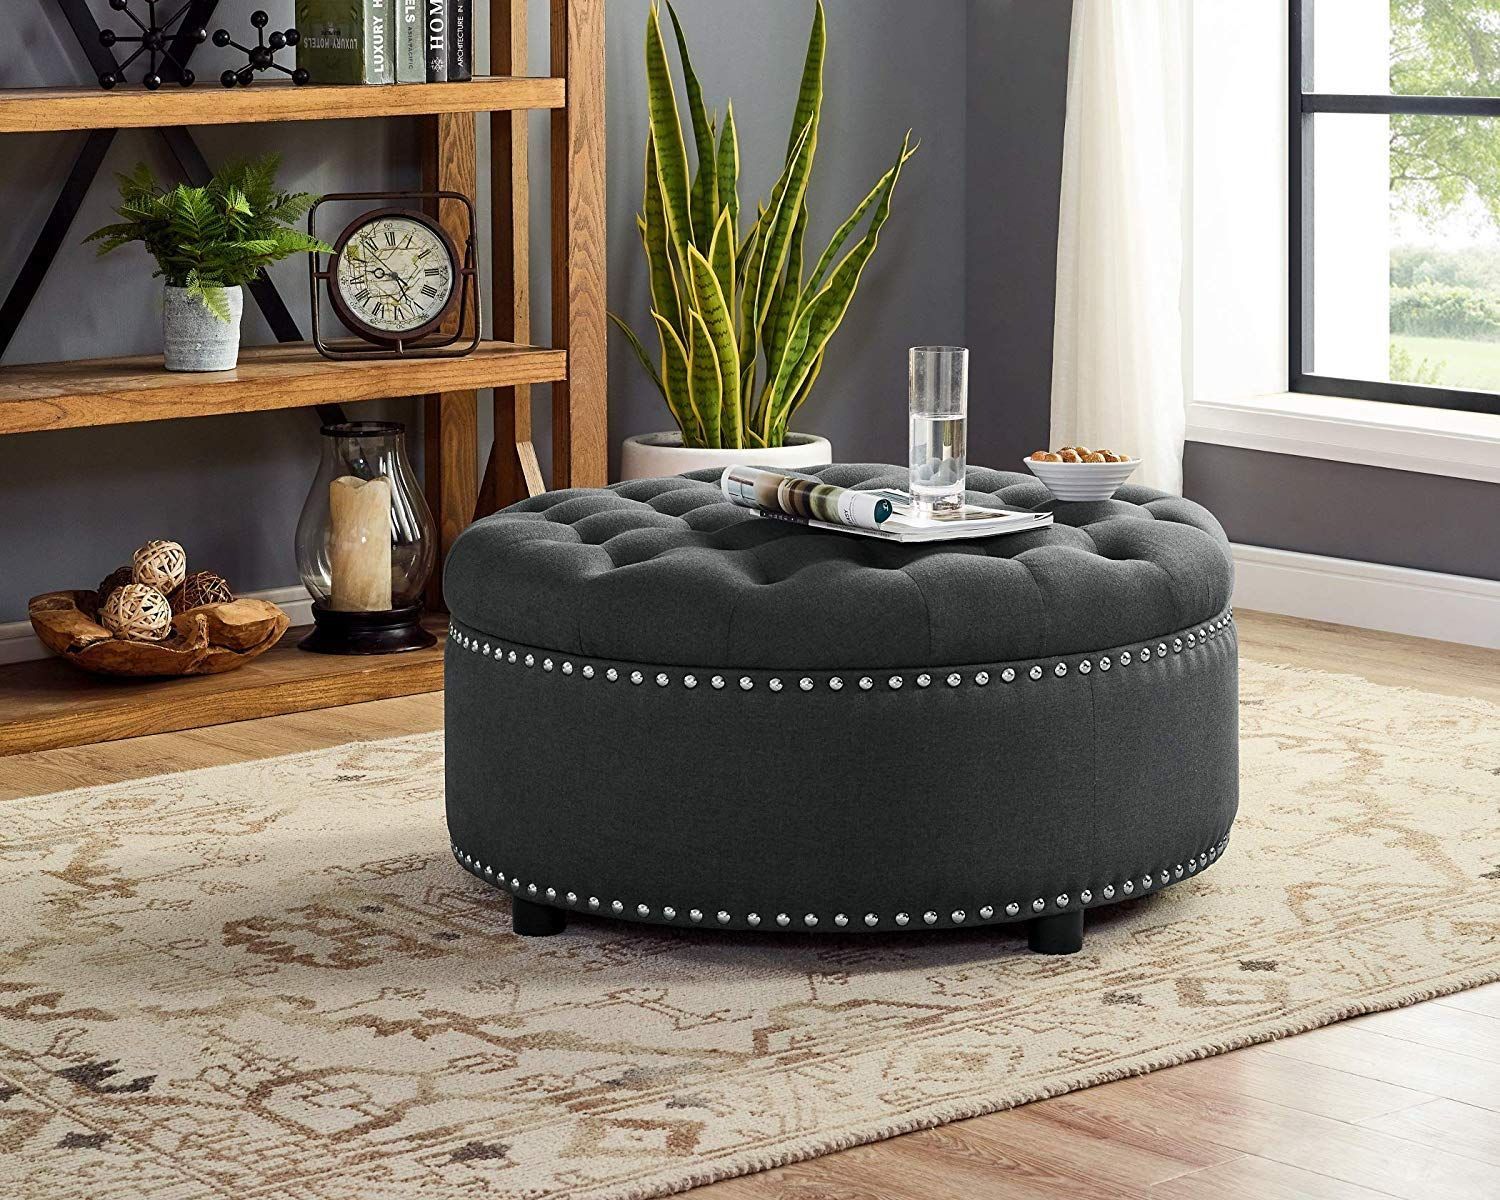 Dazone Round Storage Ottoman, Fabric Upholstered Nailhead Studded Within White Large Round Ottomans (View 7 of 20)